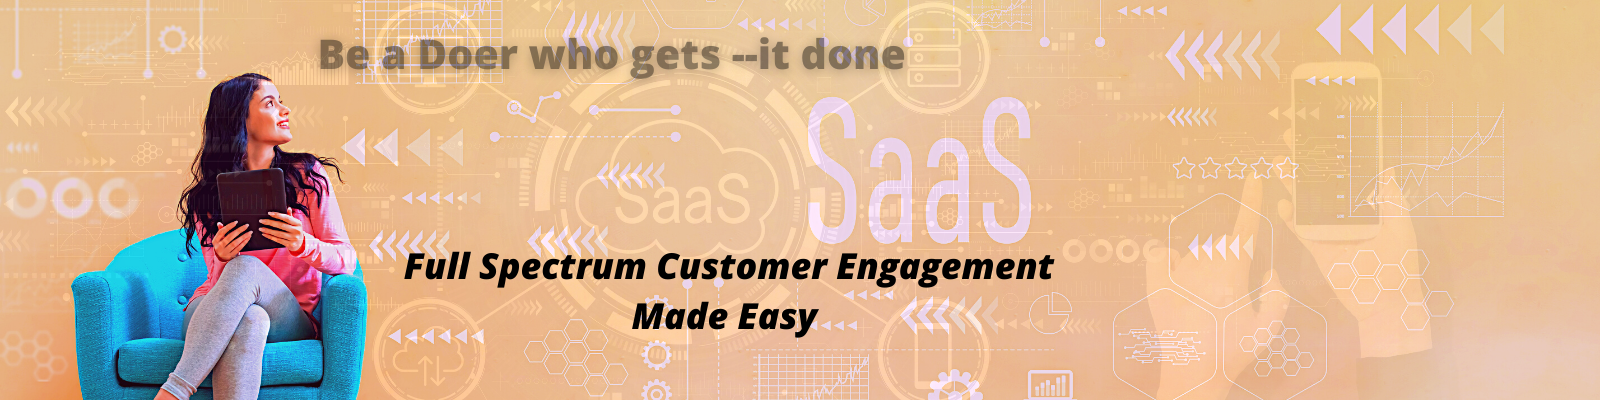 Customer Experience Management Solutions